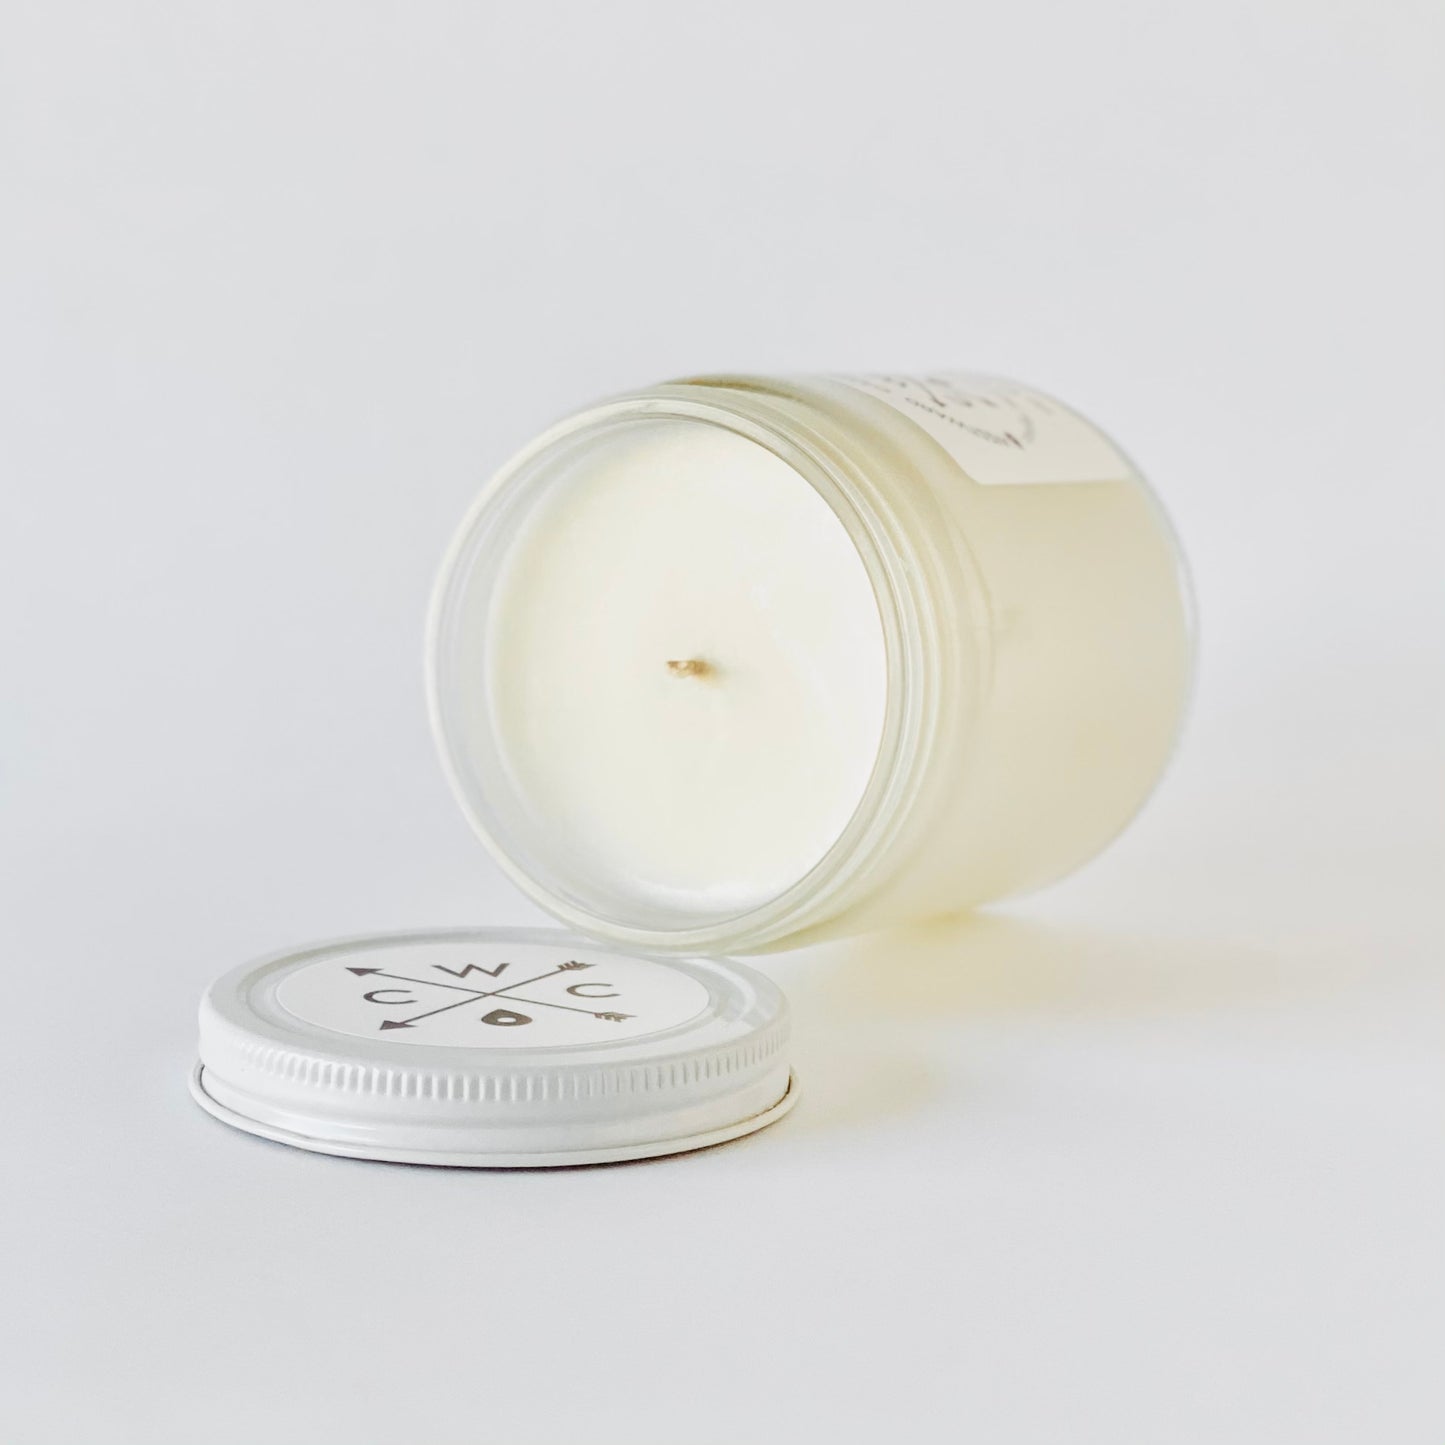 County Fair Soy Candle - Westward Candle Company 